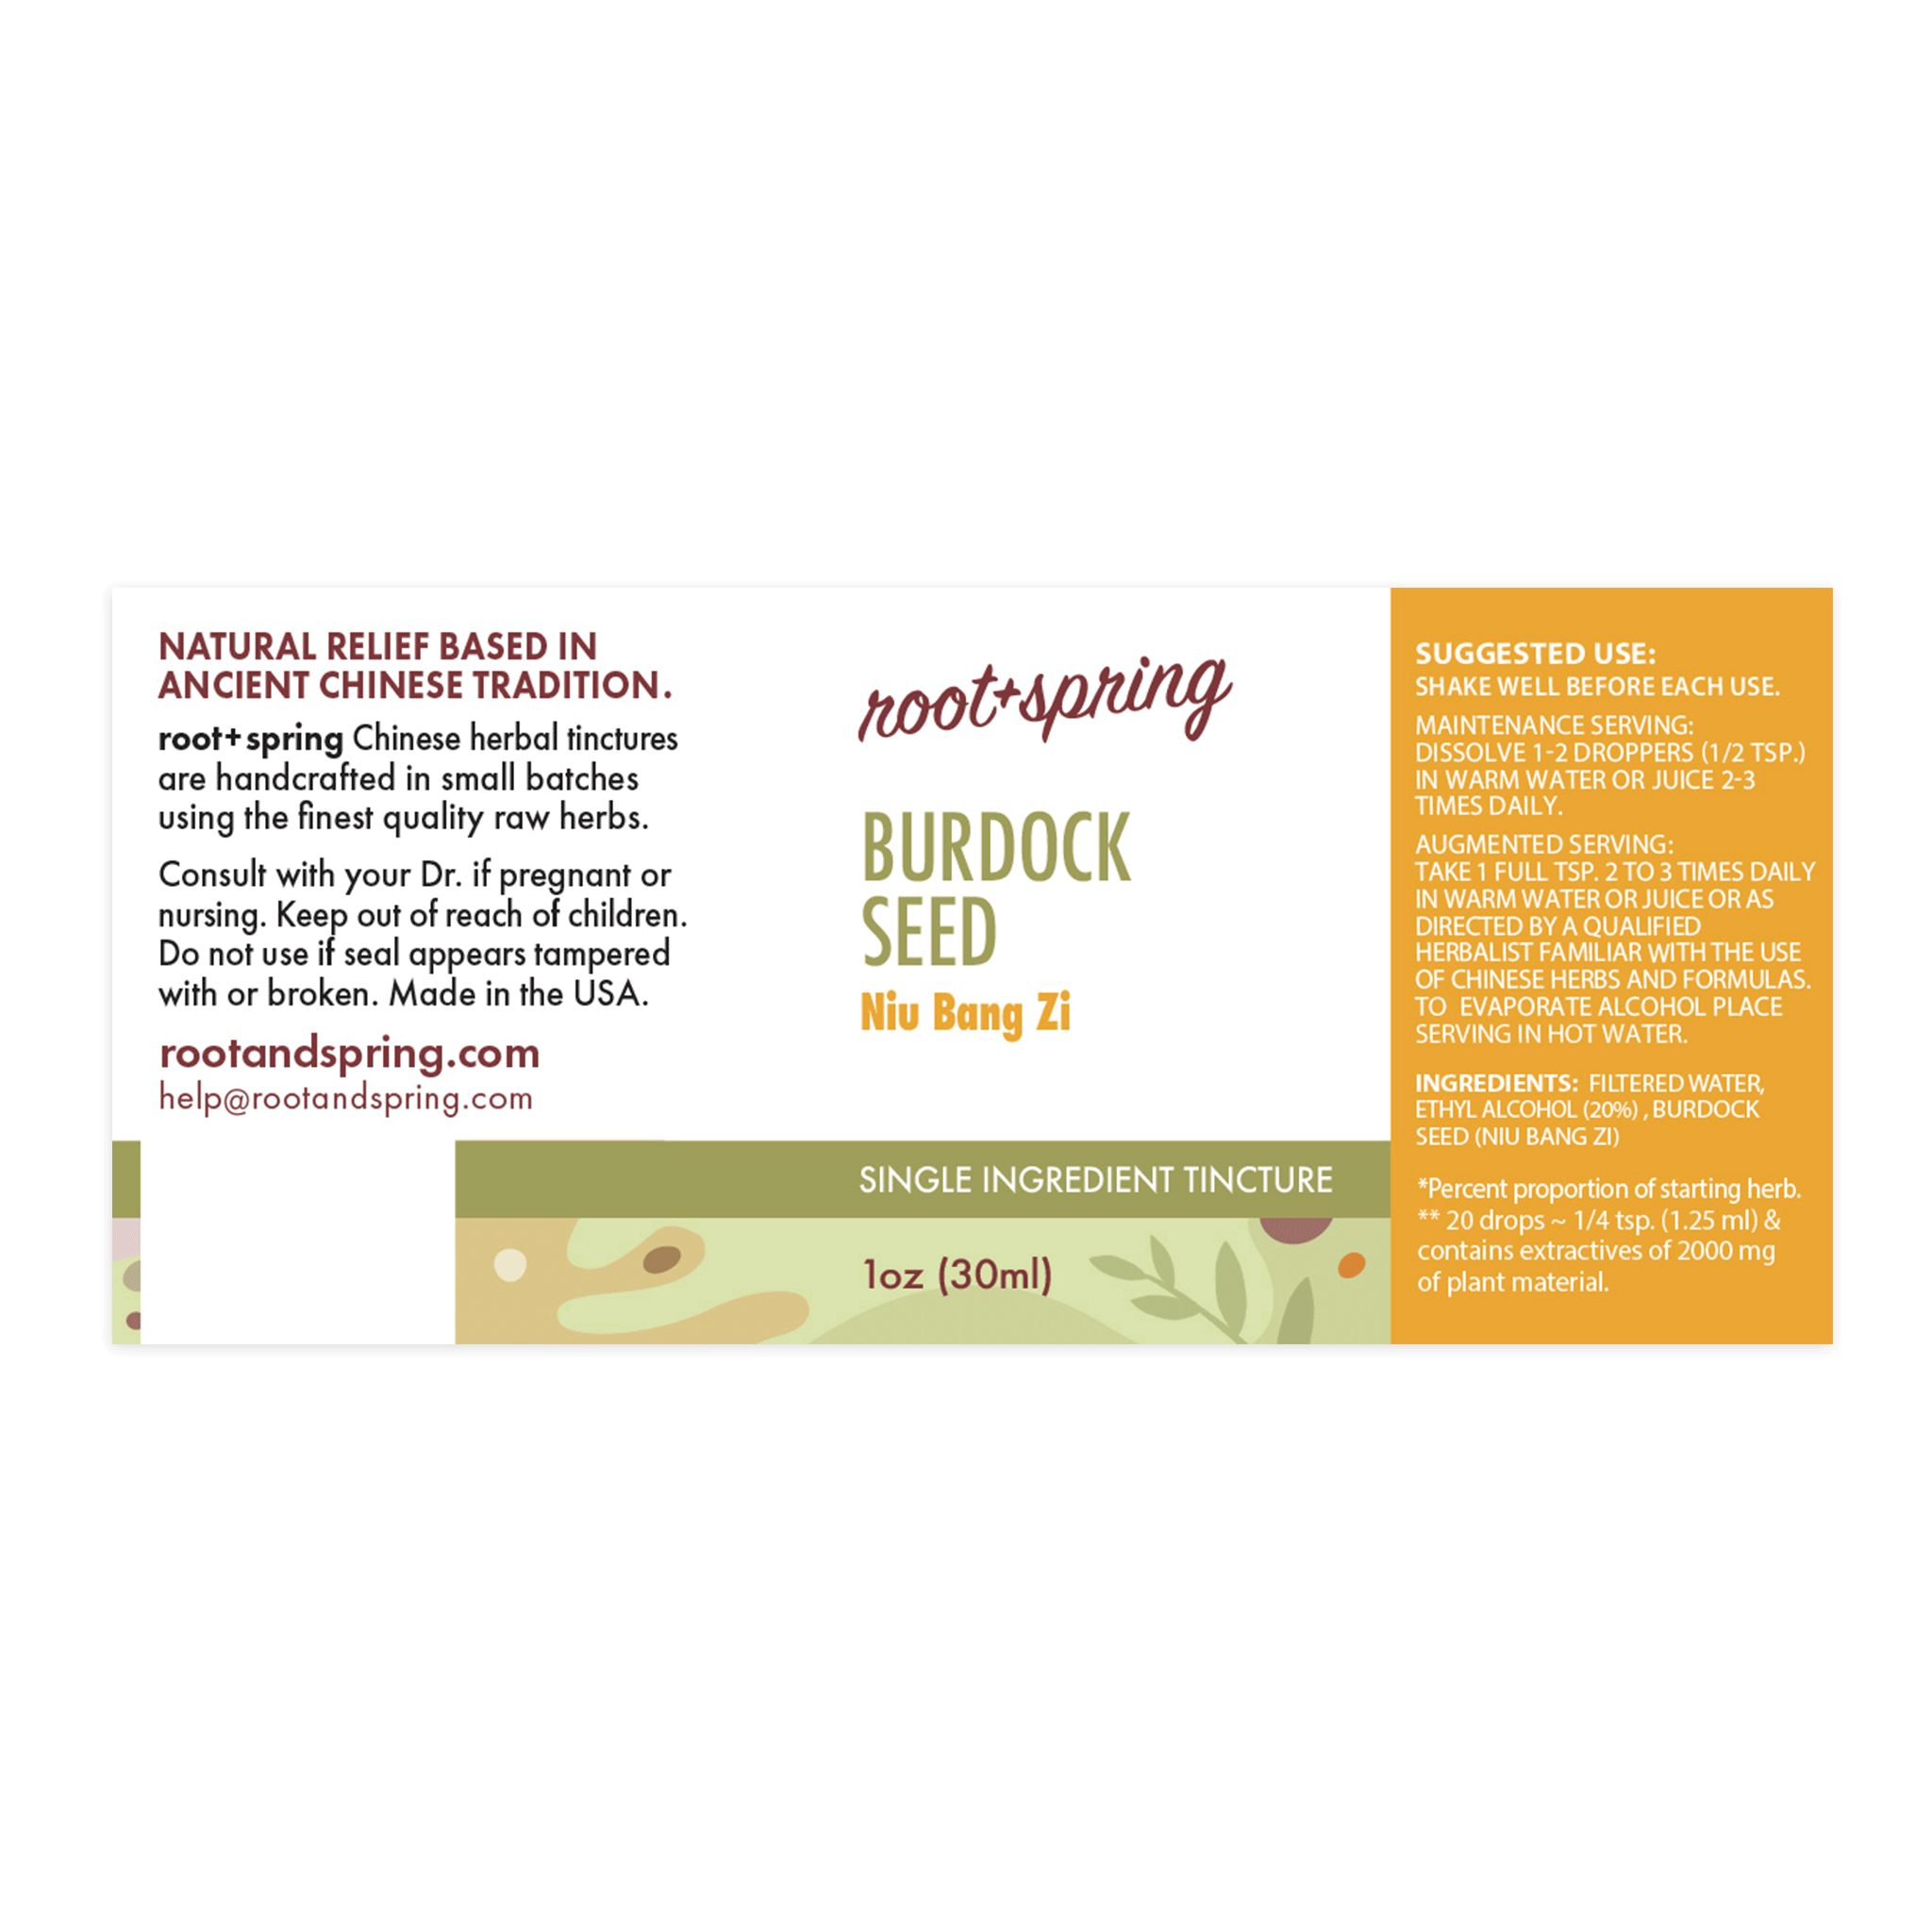 Label for Burdock Seed, or Niu Bang Zi, herbal tincture by root + spring. 